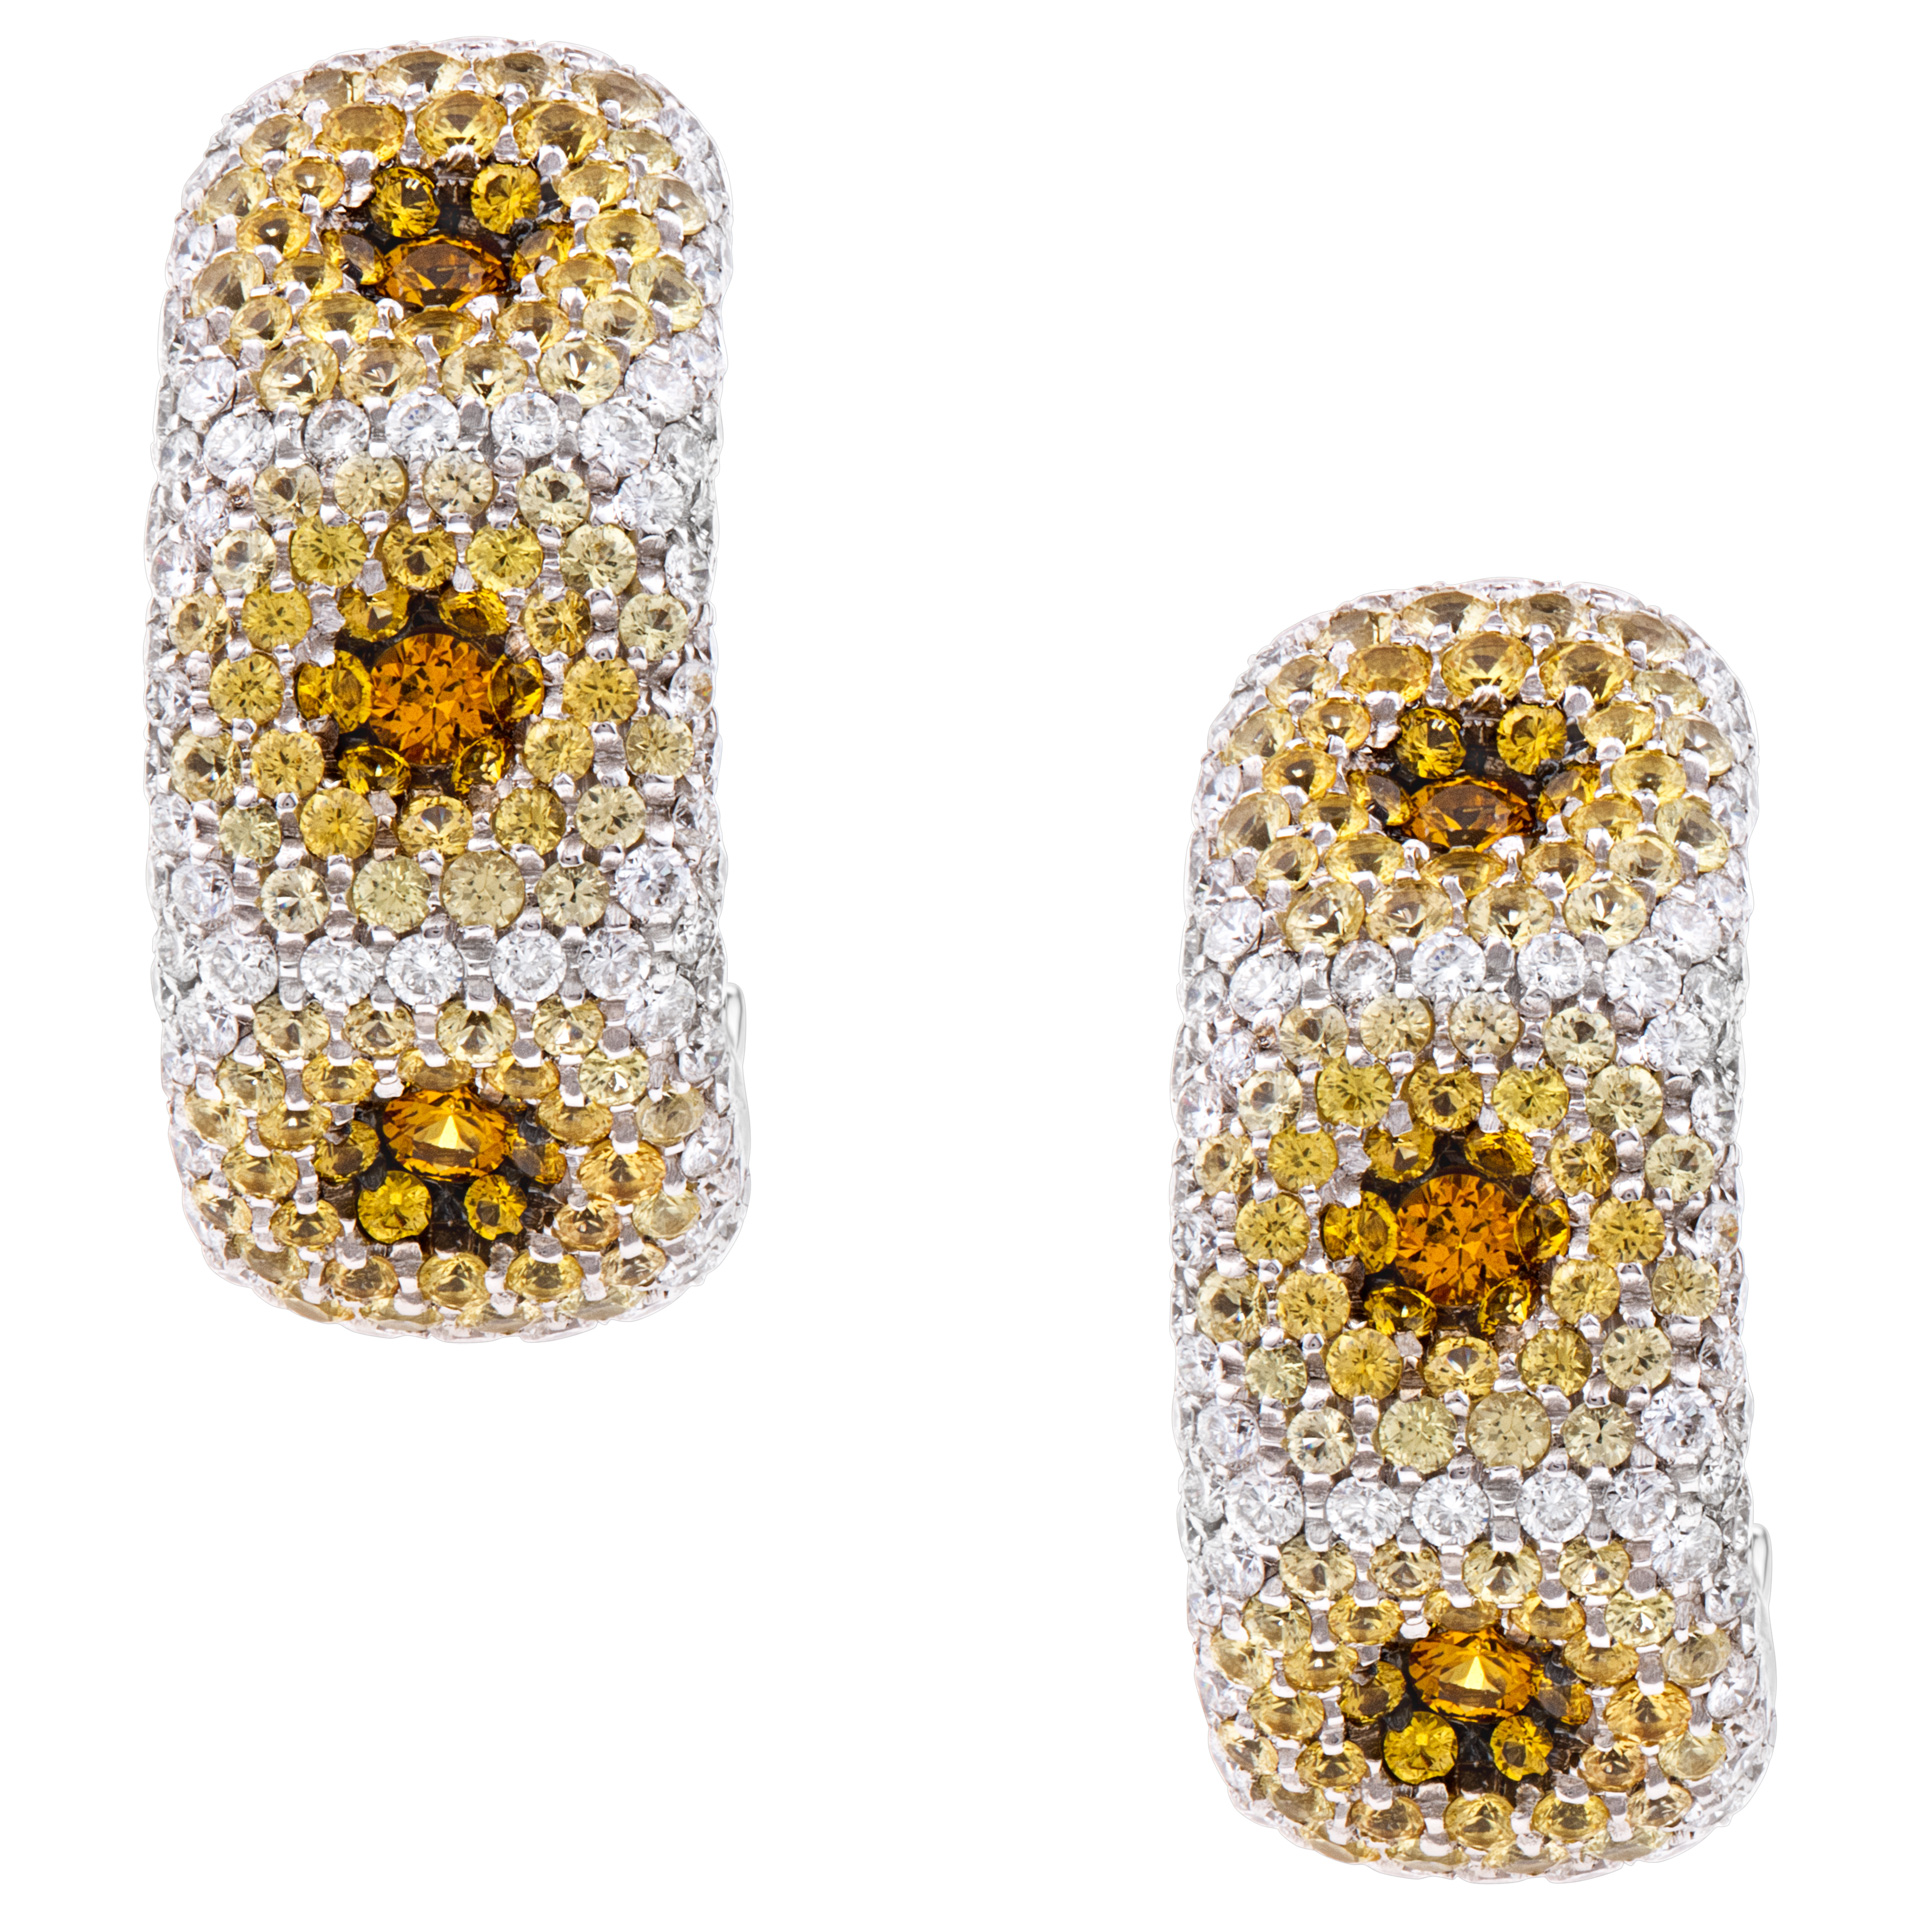 18k white gold pave diamond earrings with yellow sapphires image 1